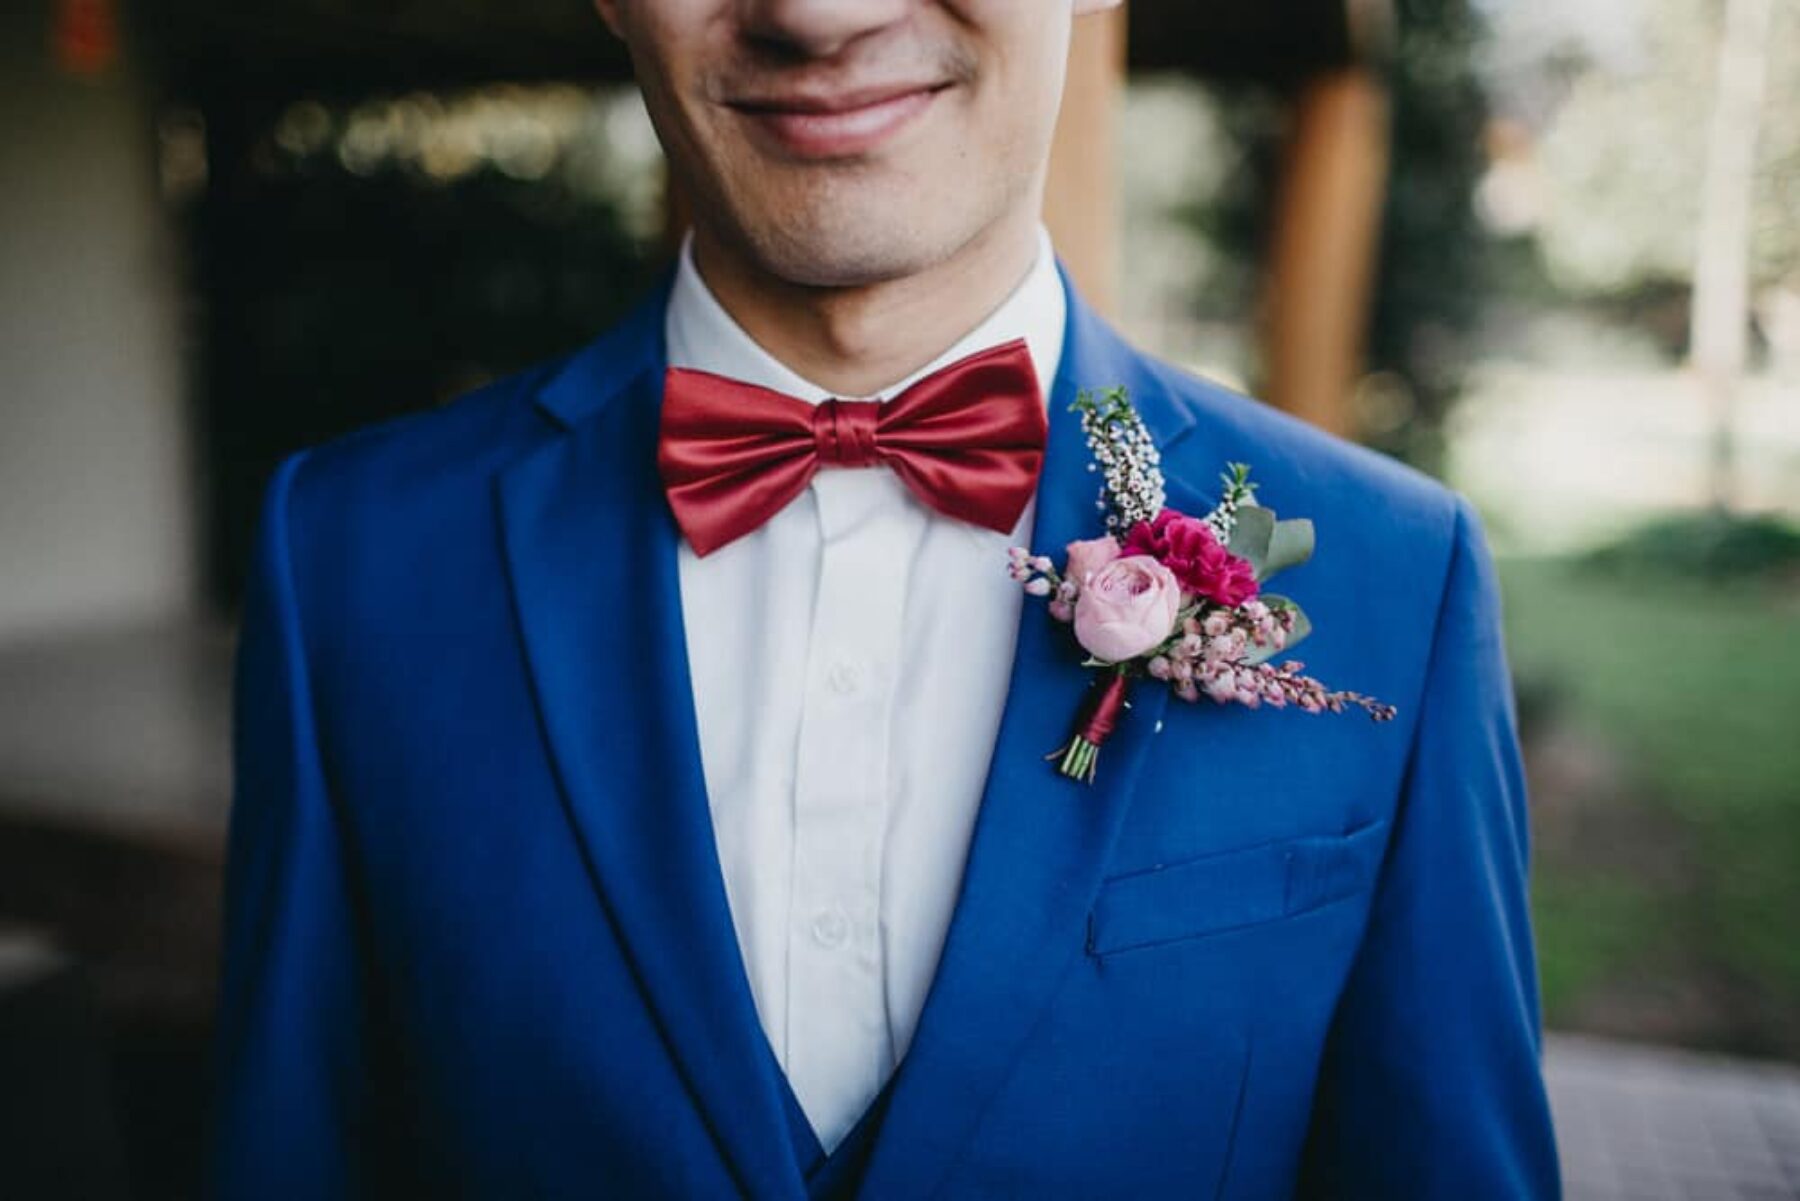 Cobalt blue suit and red bow tie